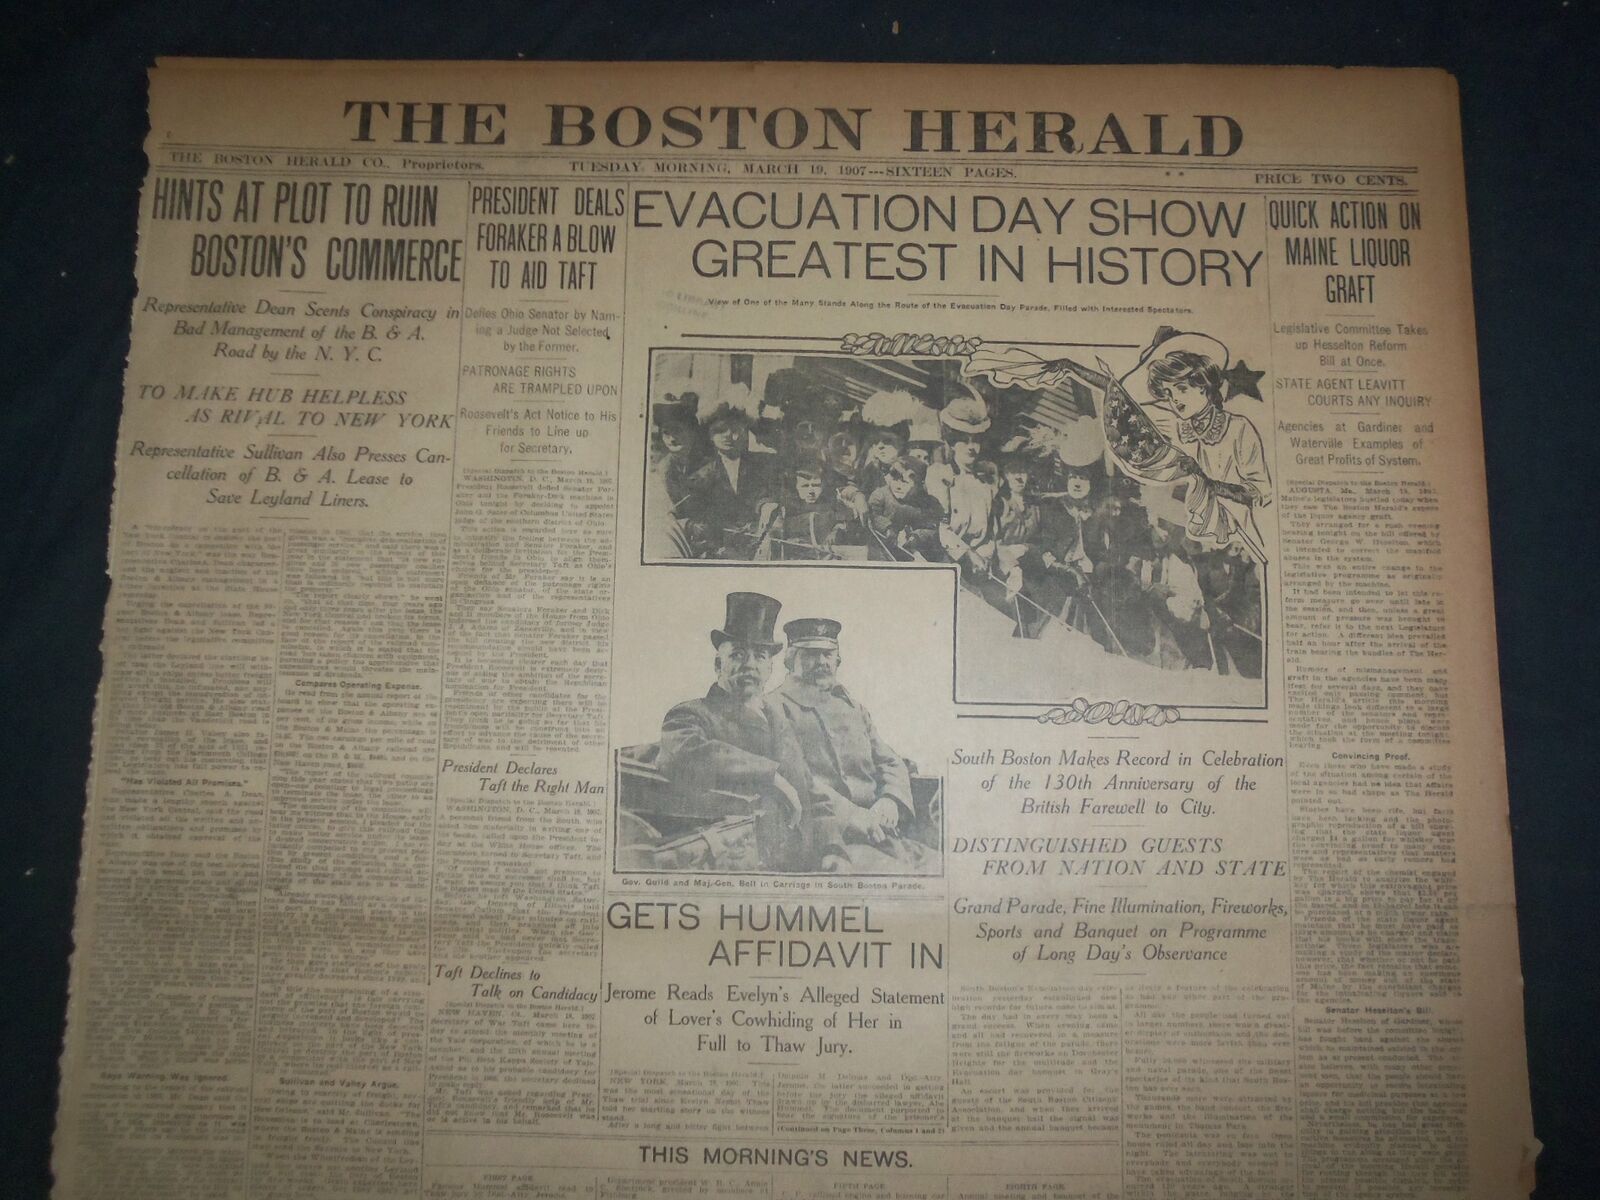 1907 MARCH 19 THE BOSTON HERALD - EVACUATION DAY SHOW GREATEST IN HISTORY- BH 13